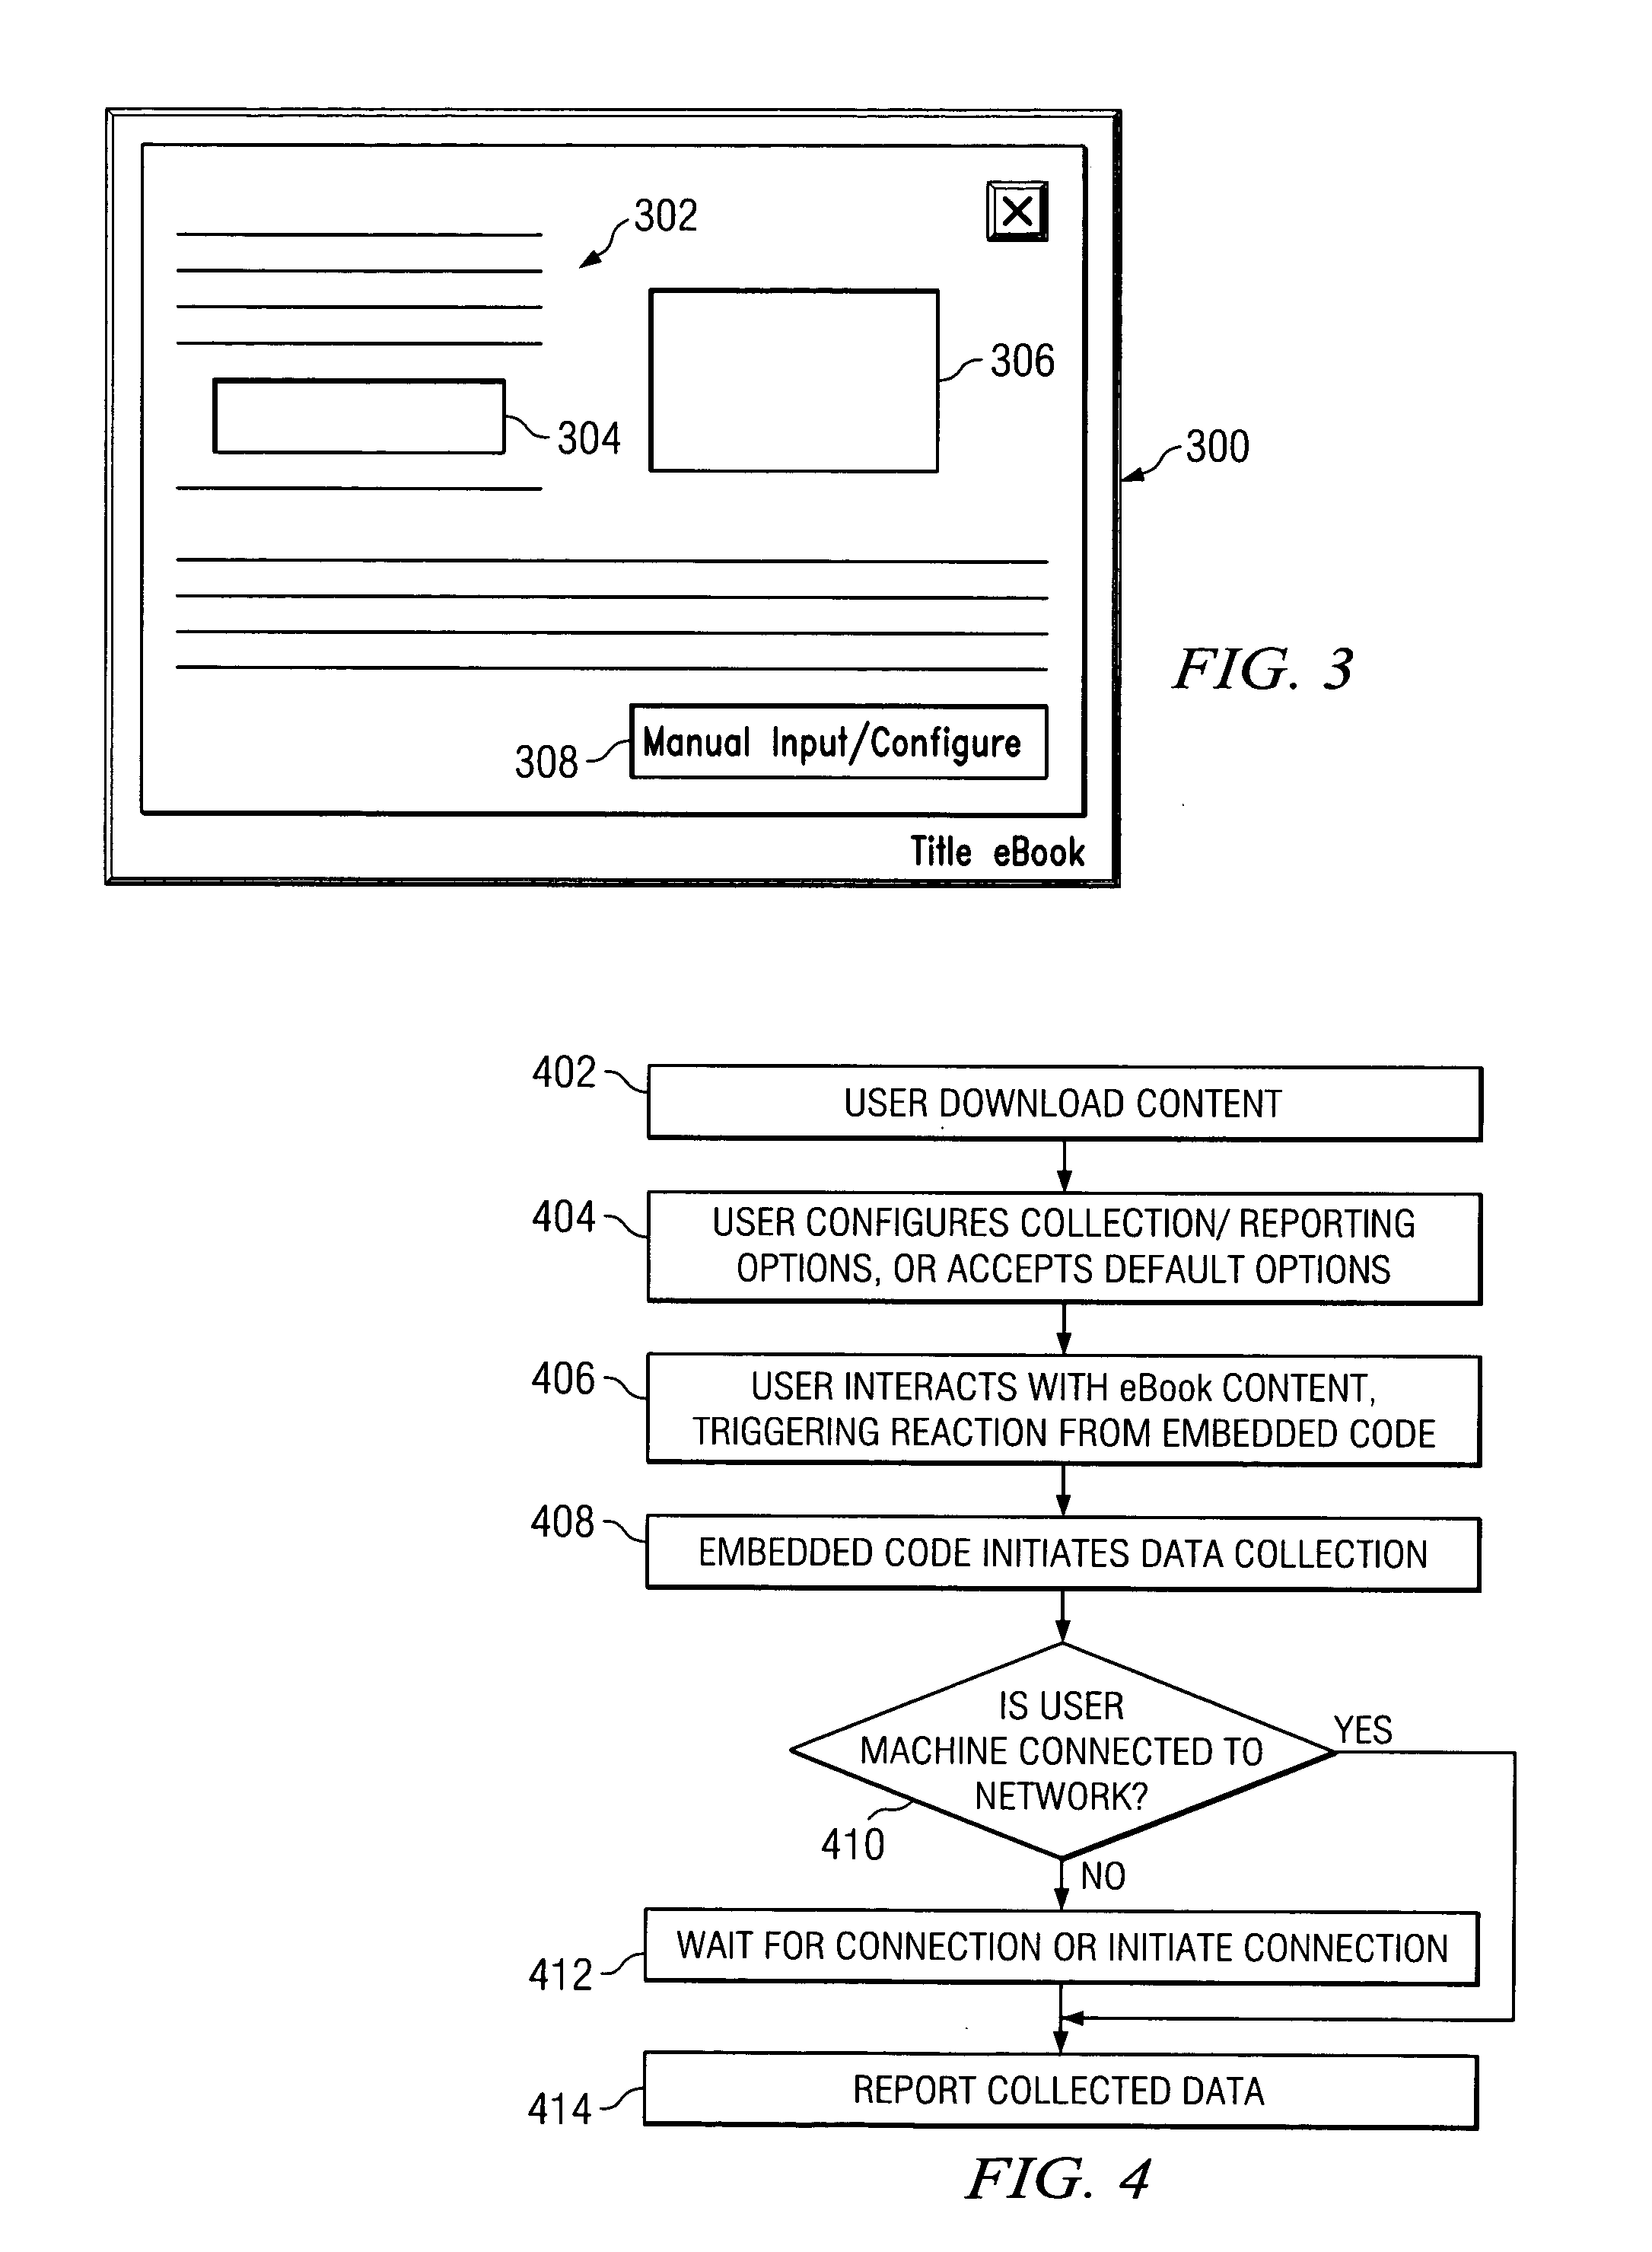 Self-contained and automated eLibrary profiling system